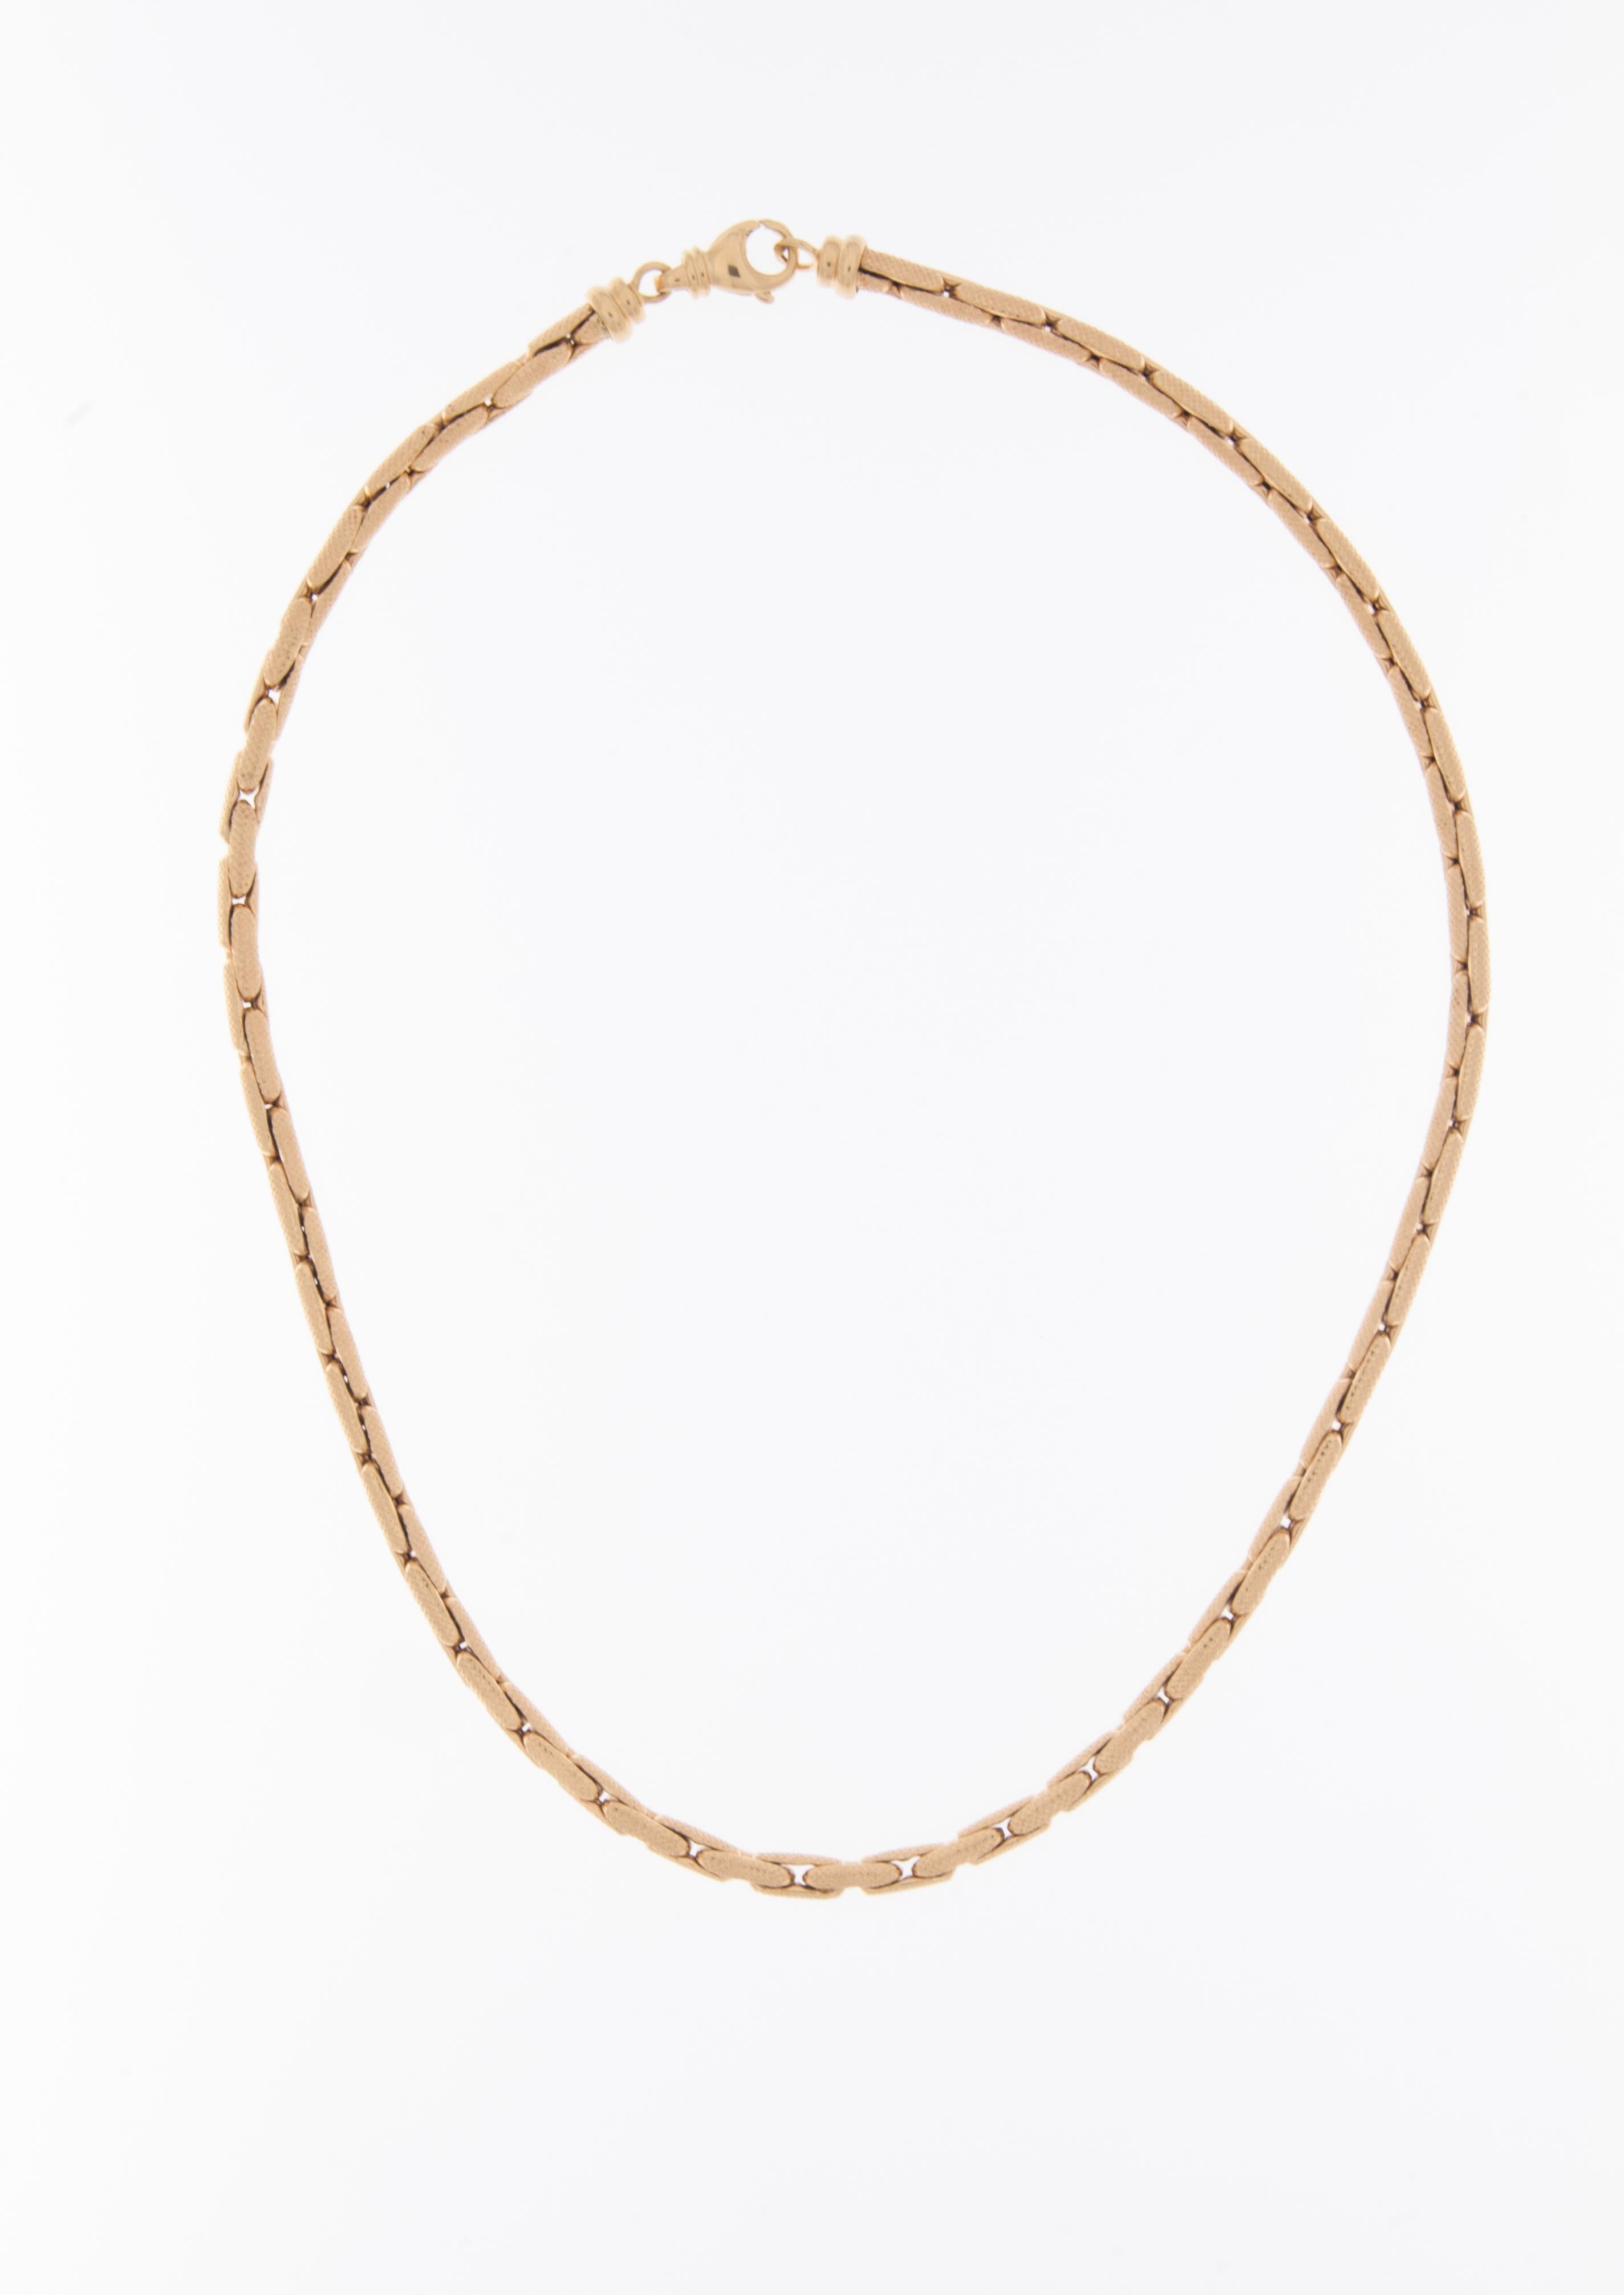 The Portuguese 19kt Yellow Gold Chain Necklace with a satin finish and relief work is a beautifully crafted and distinctive piece of jewelry. 

This exquisite necklace is made from high-quality 19-karat yellow gold, known for its rich color and